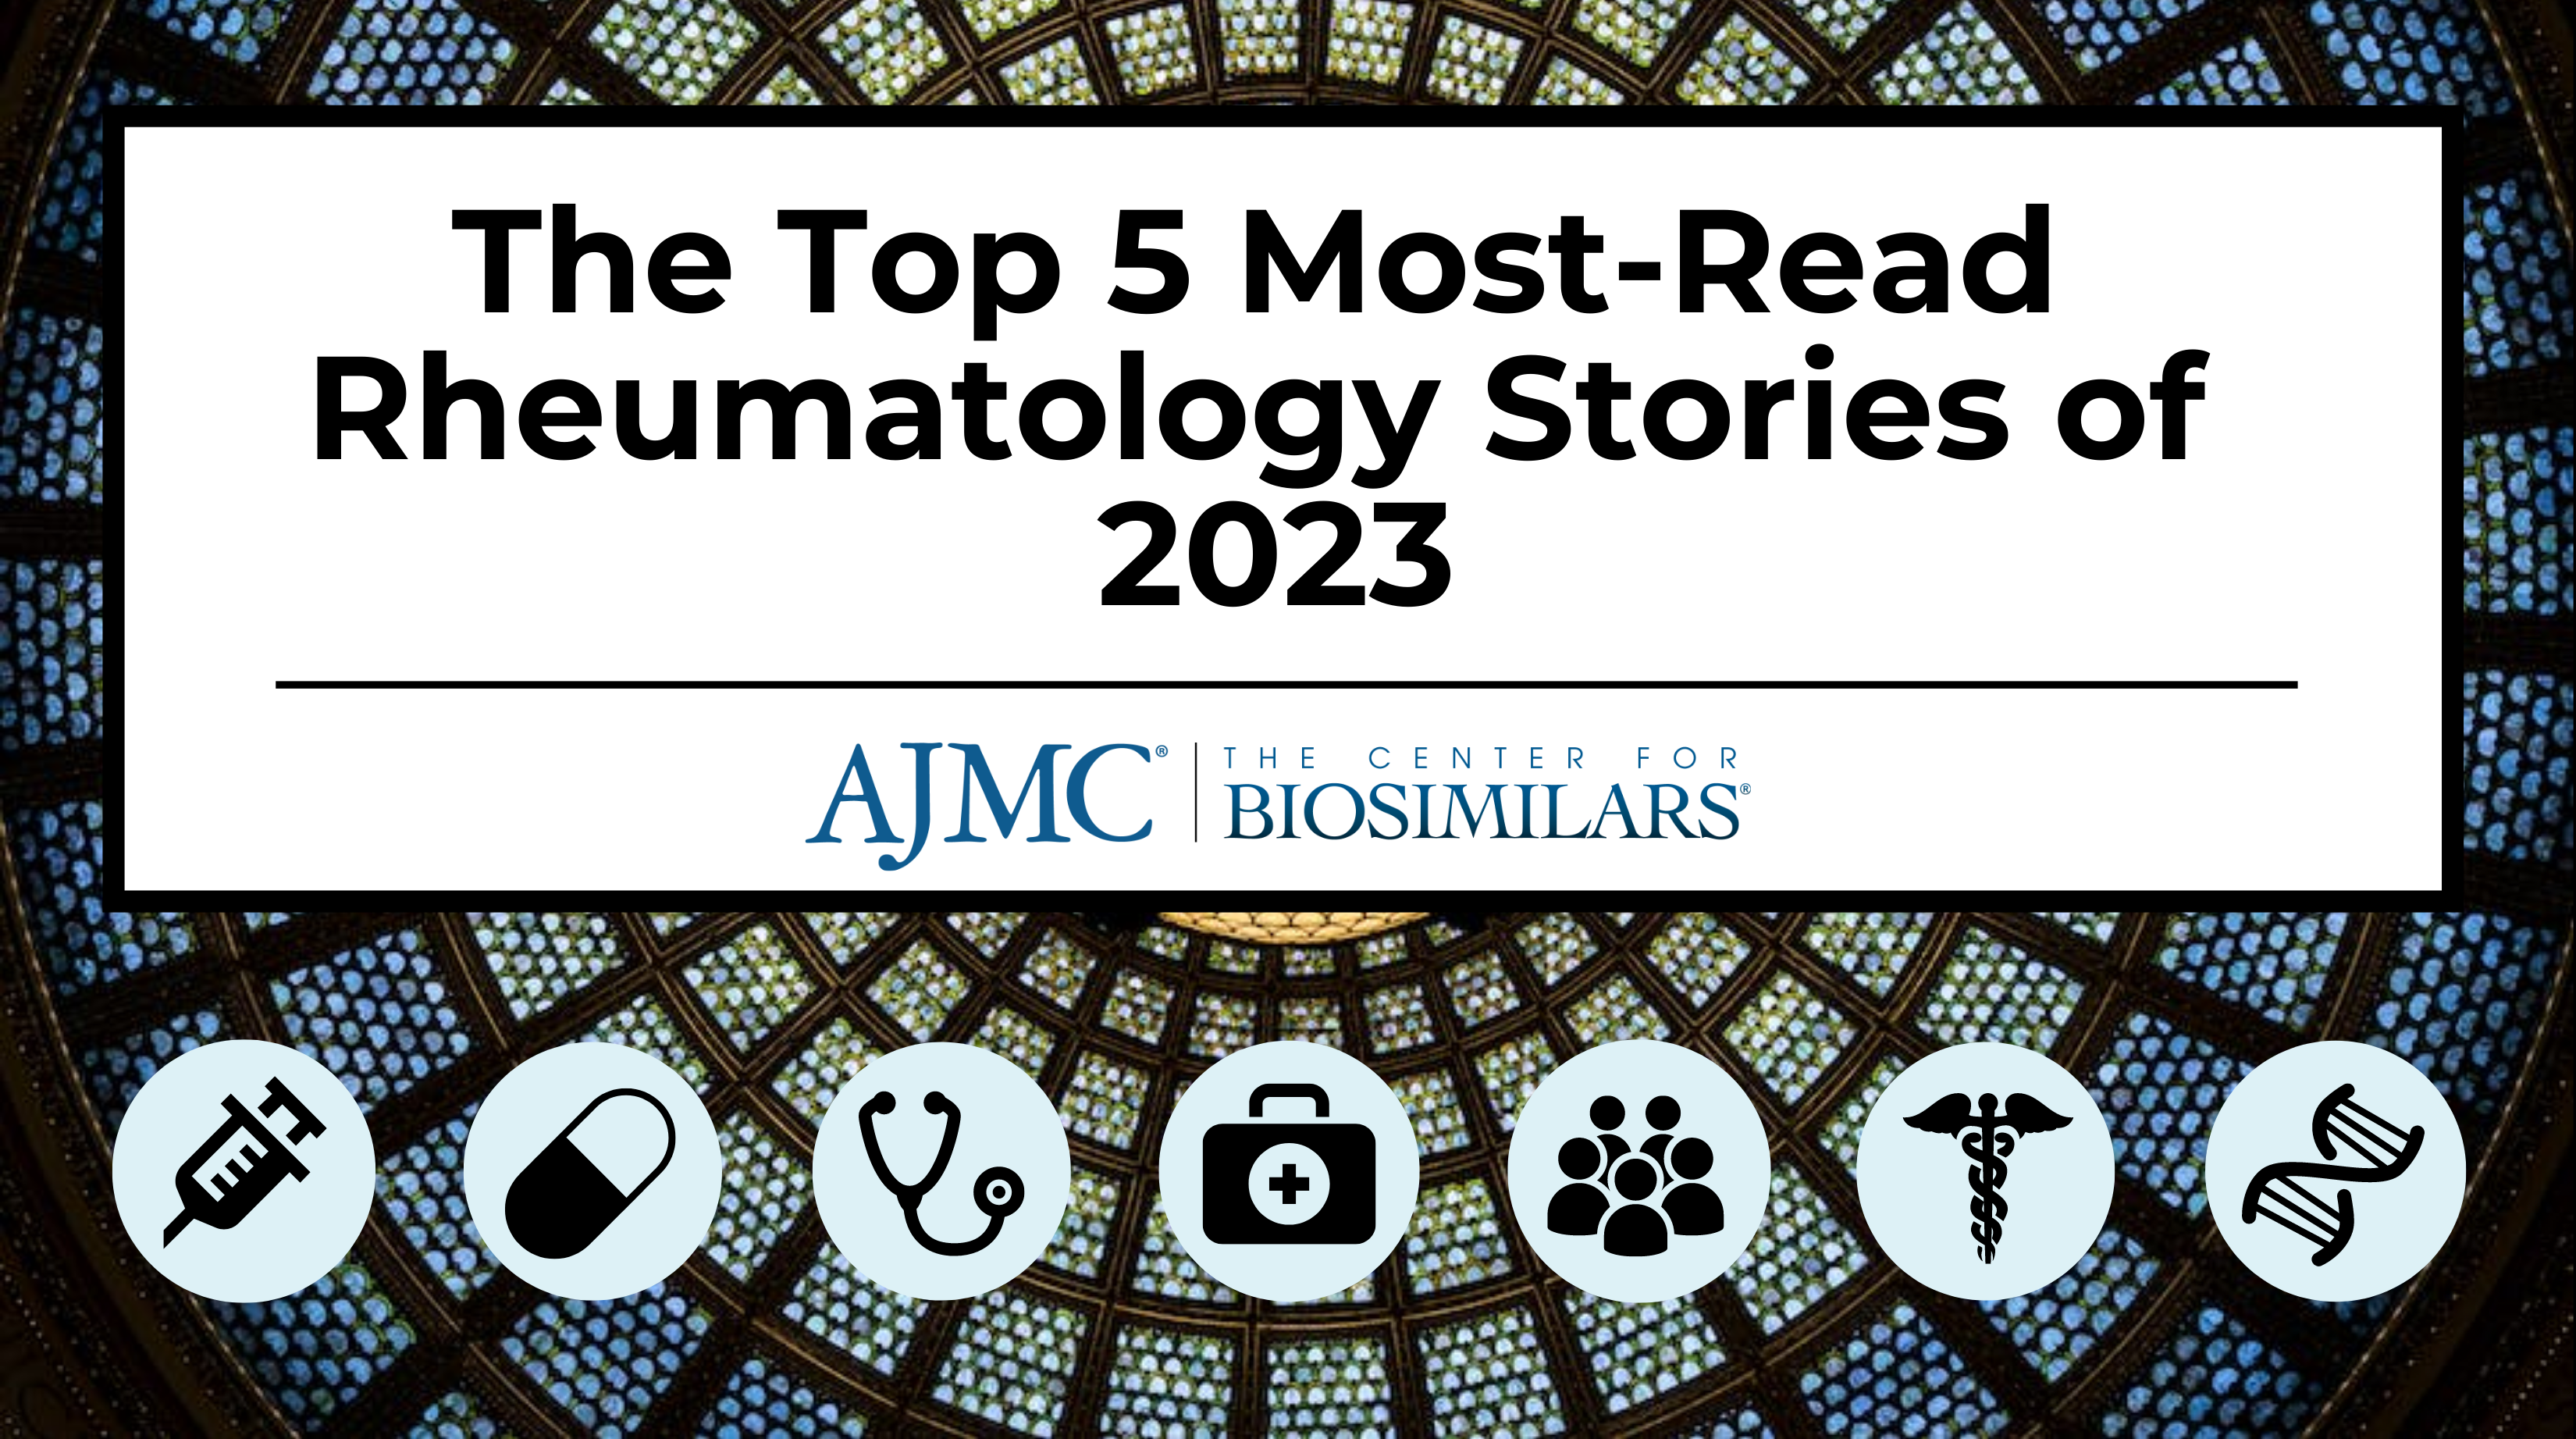 The Top 5 Most-Read Rheumatology Stories of 2023